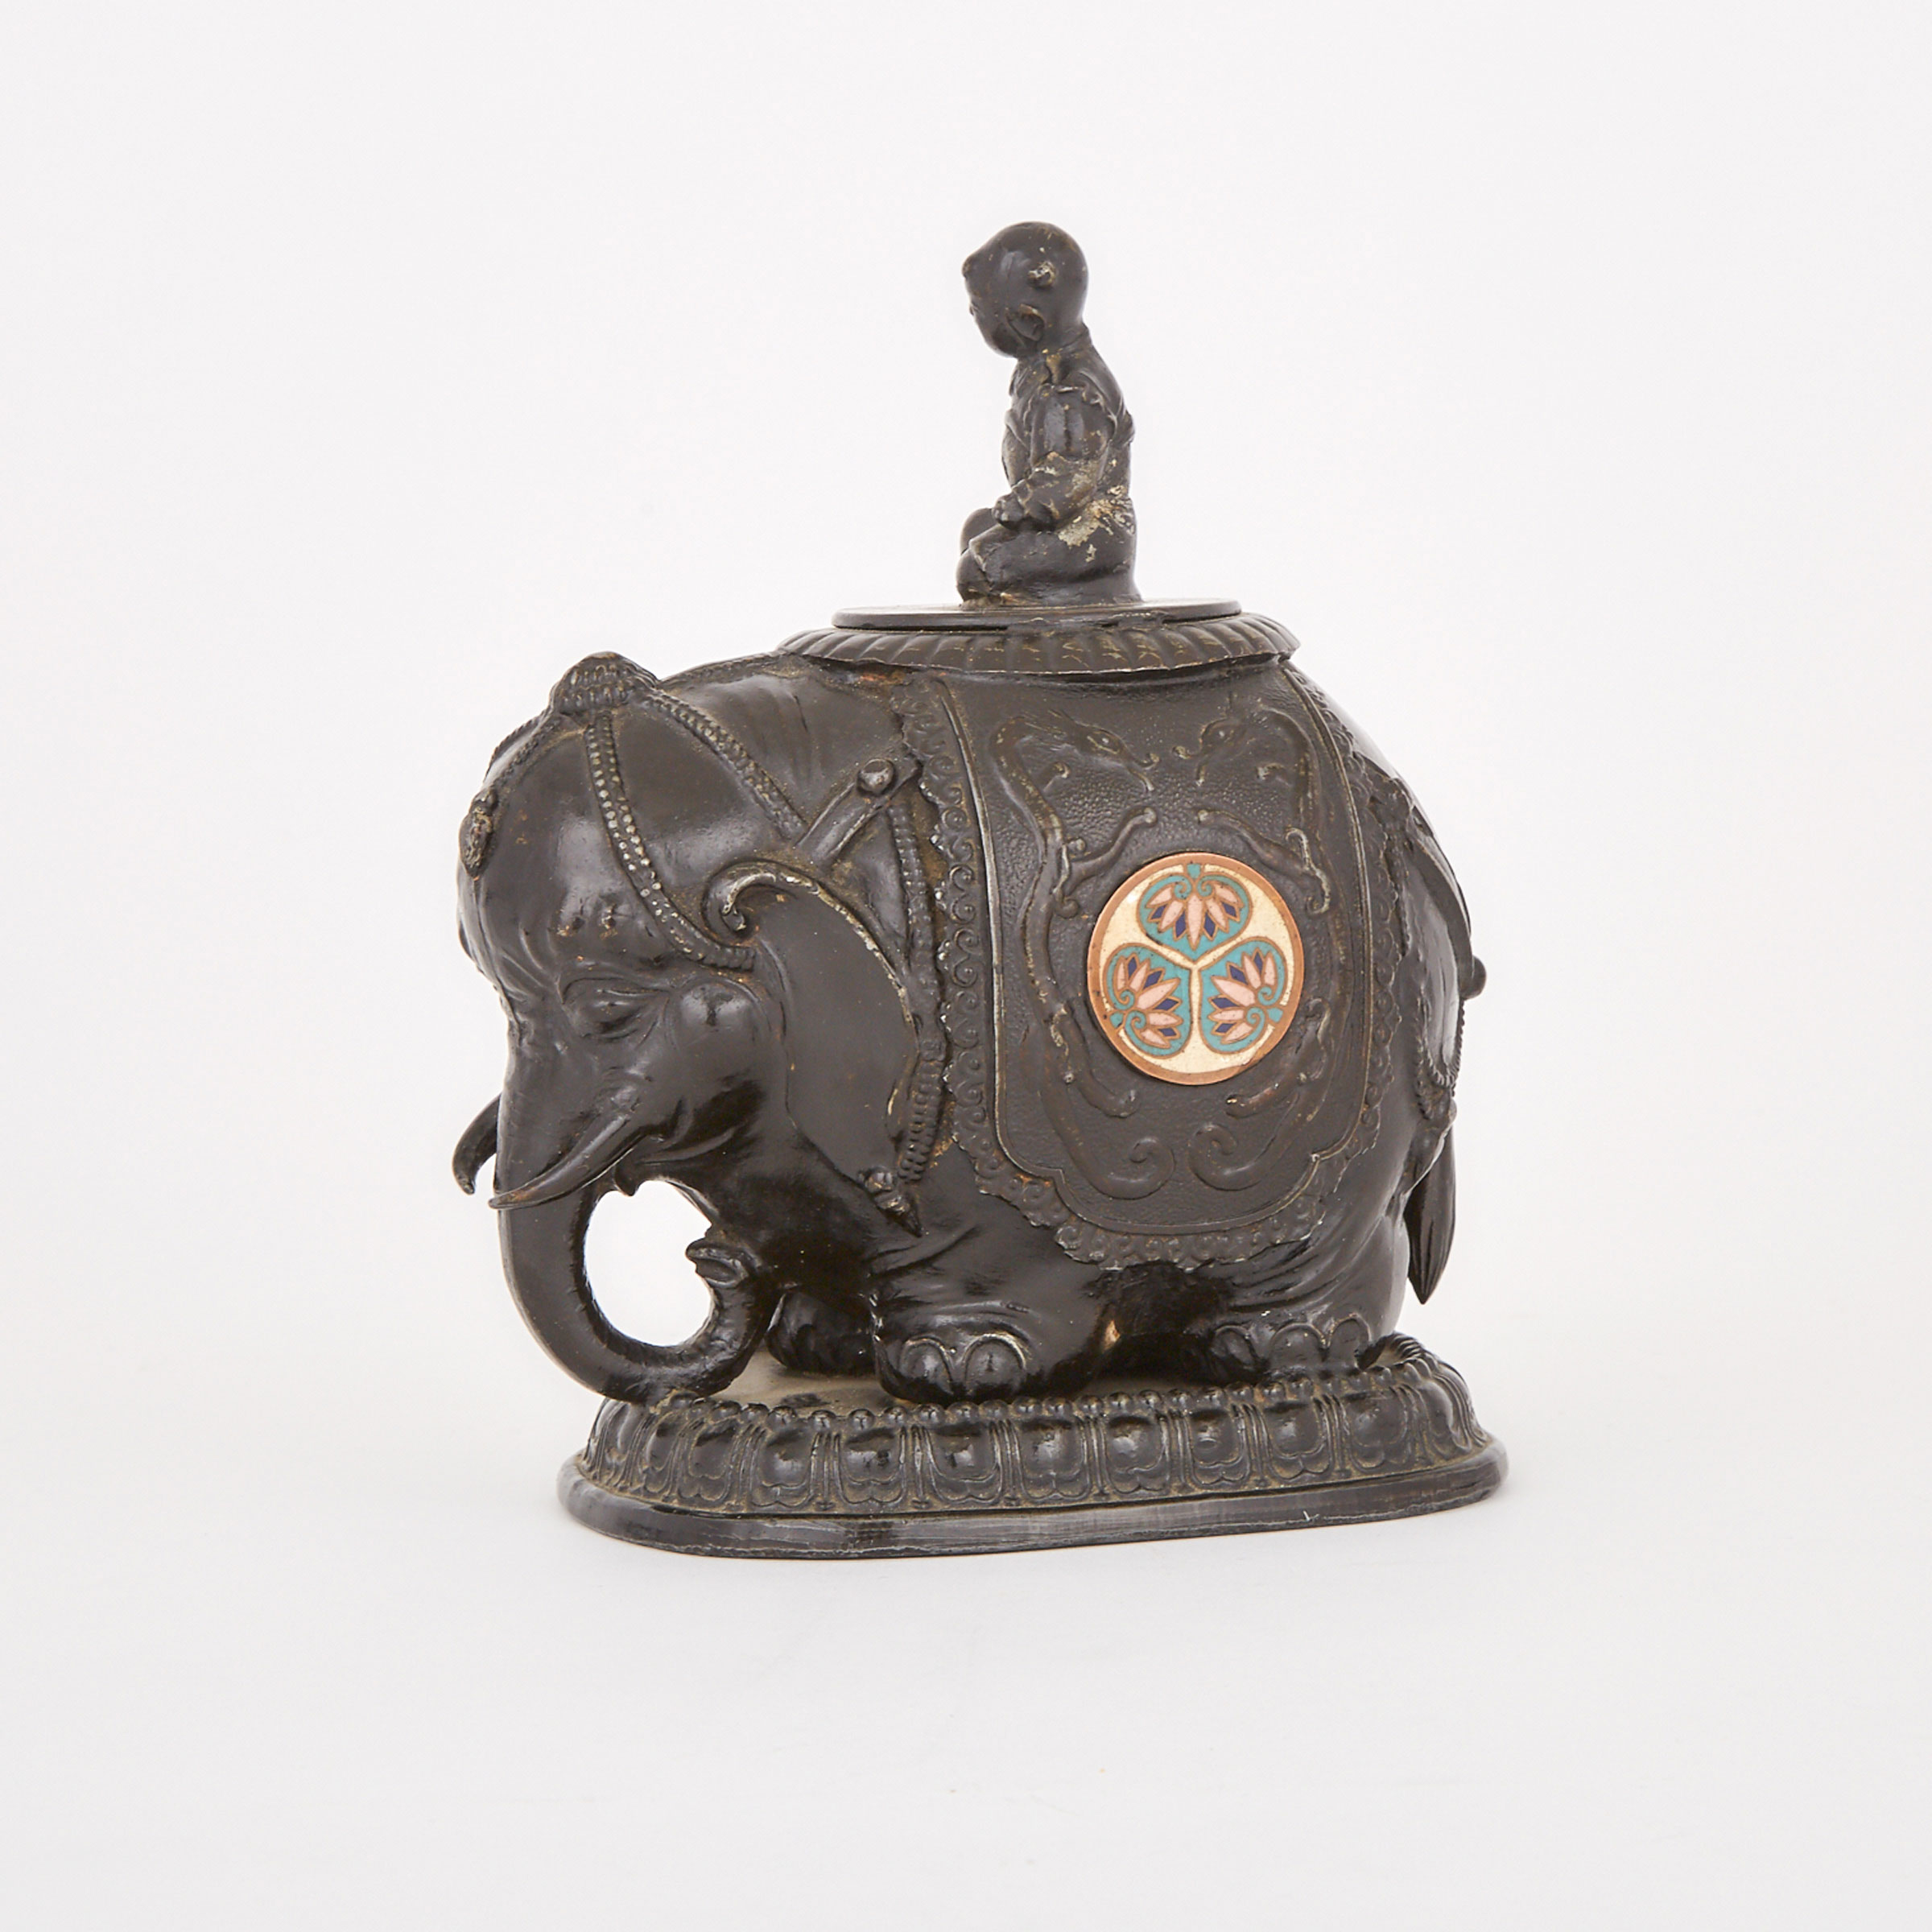 A Japanese Patinated White Metal Elephant and Rider